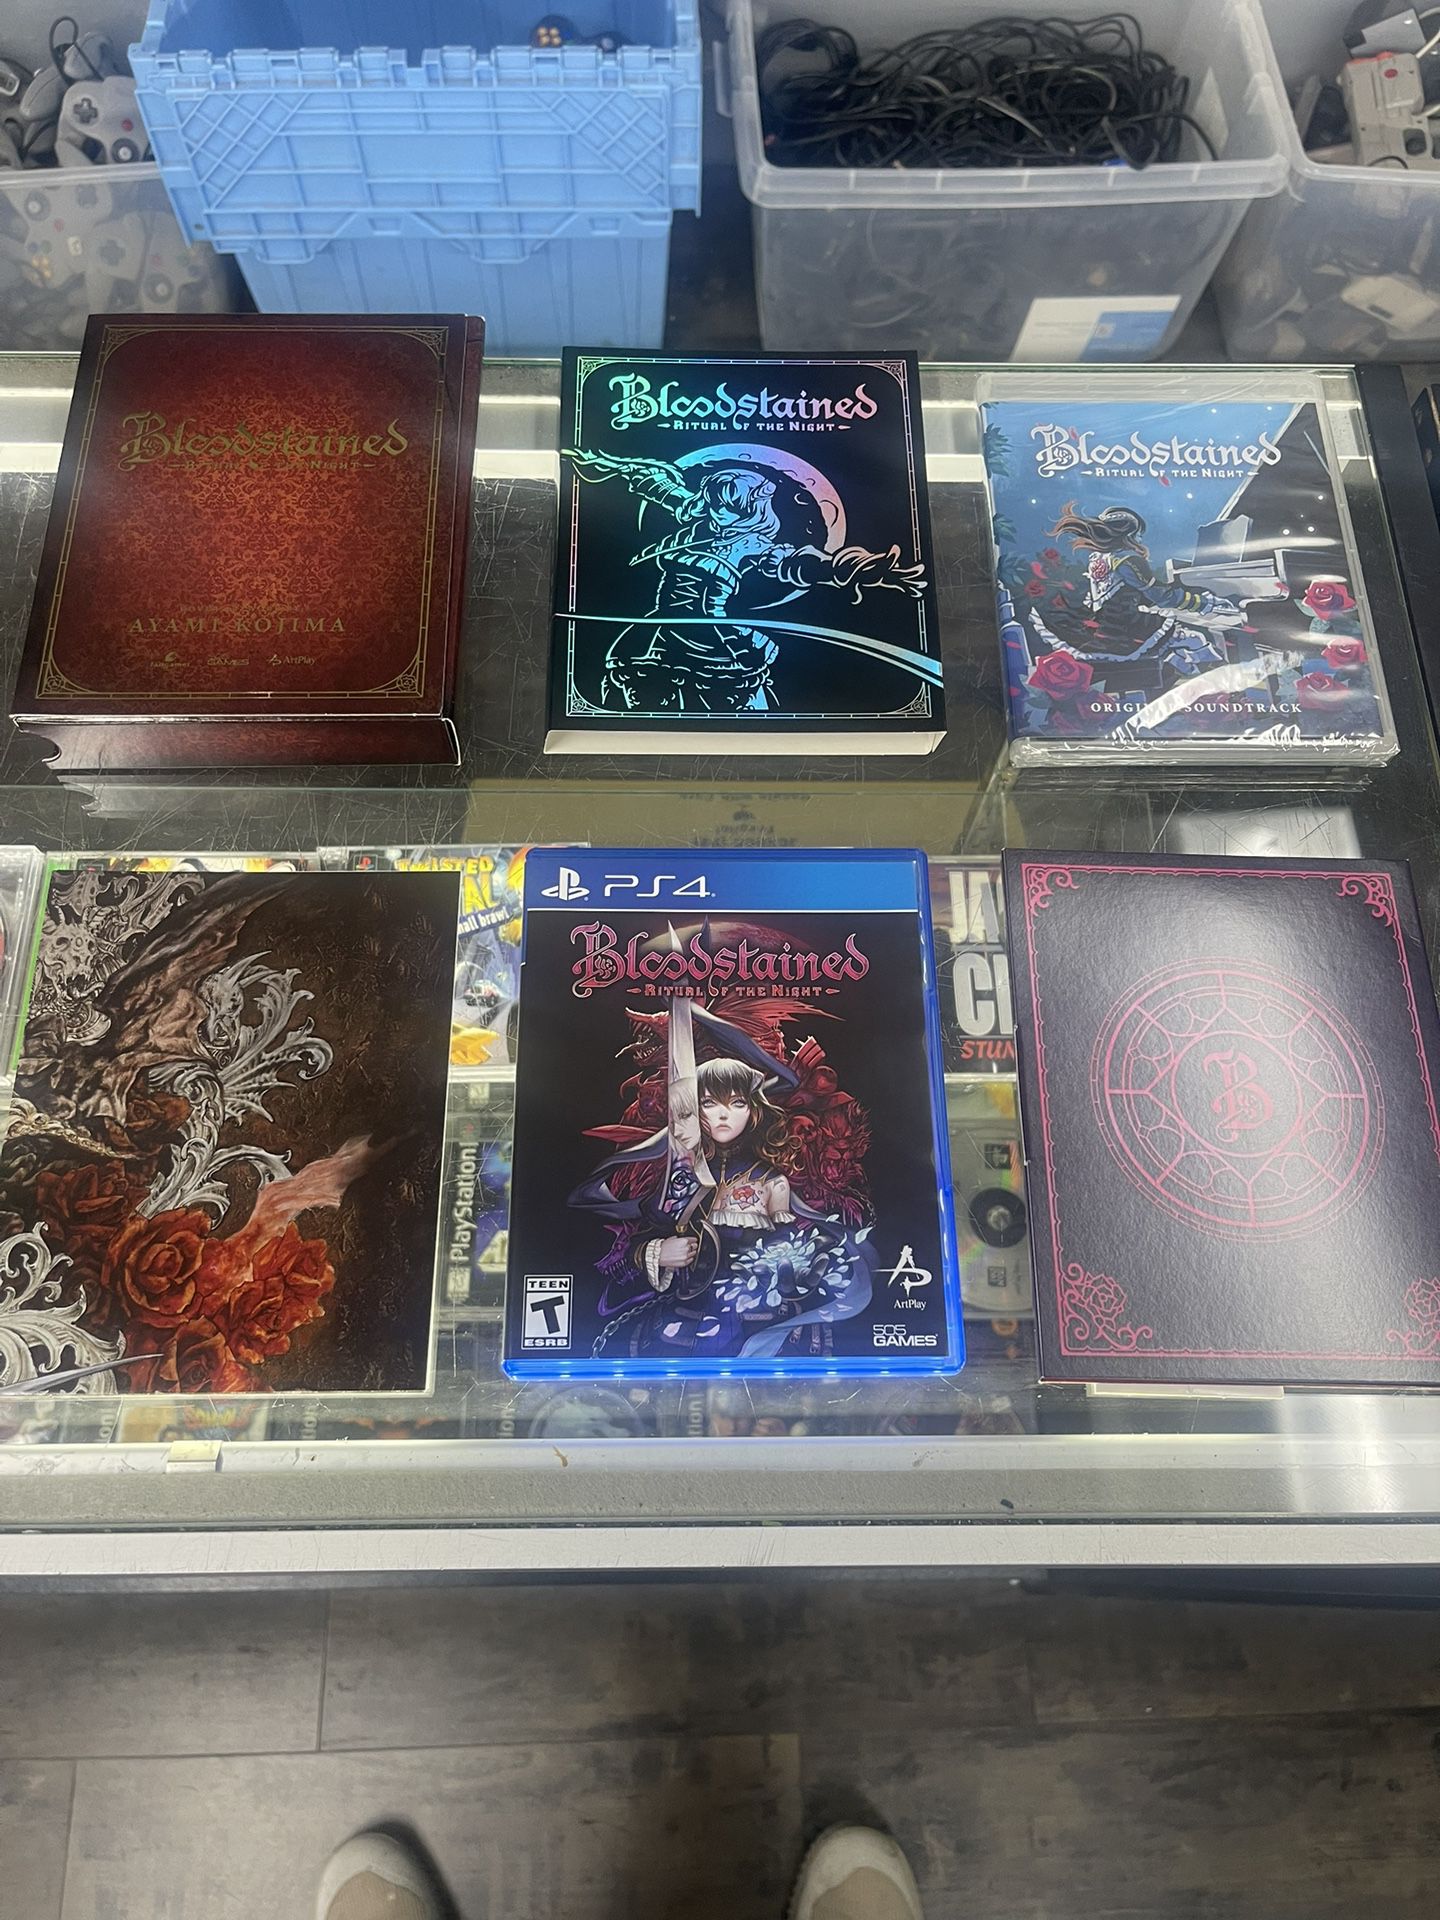 Bloodstained Ritual Of The Night Ps4 Kickstarter Rare $300 Gamehogs 11am-7pm